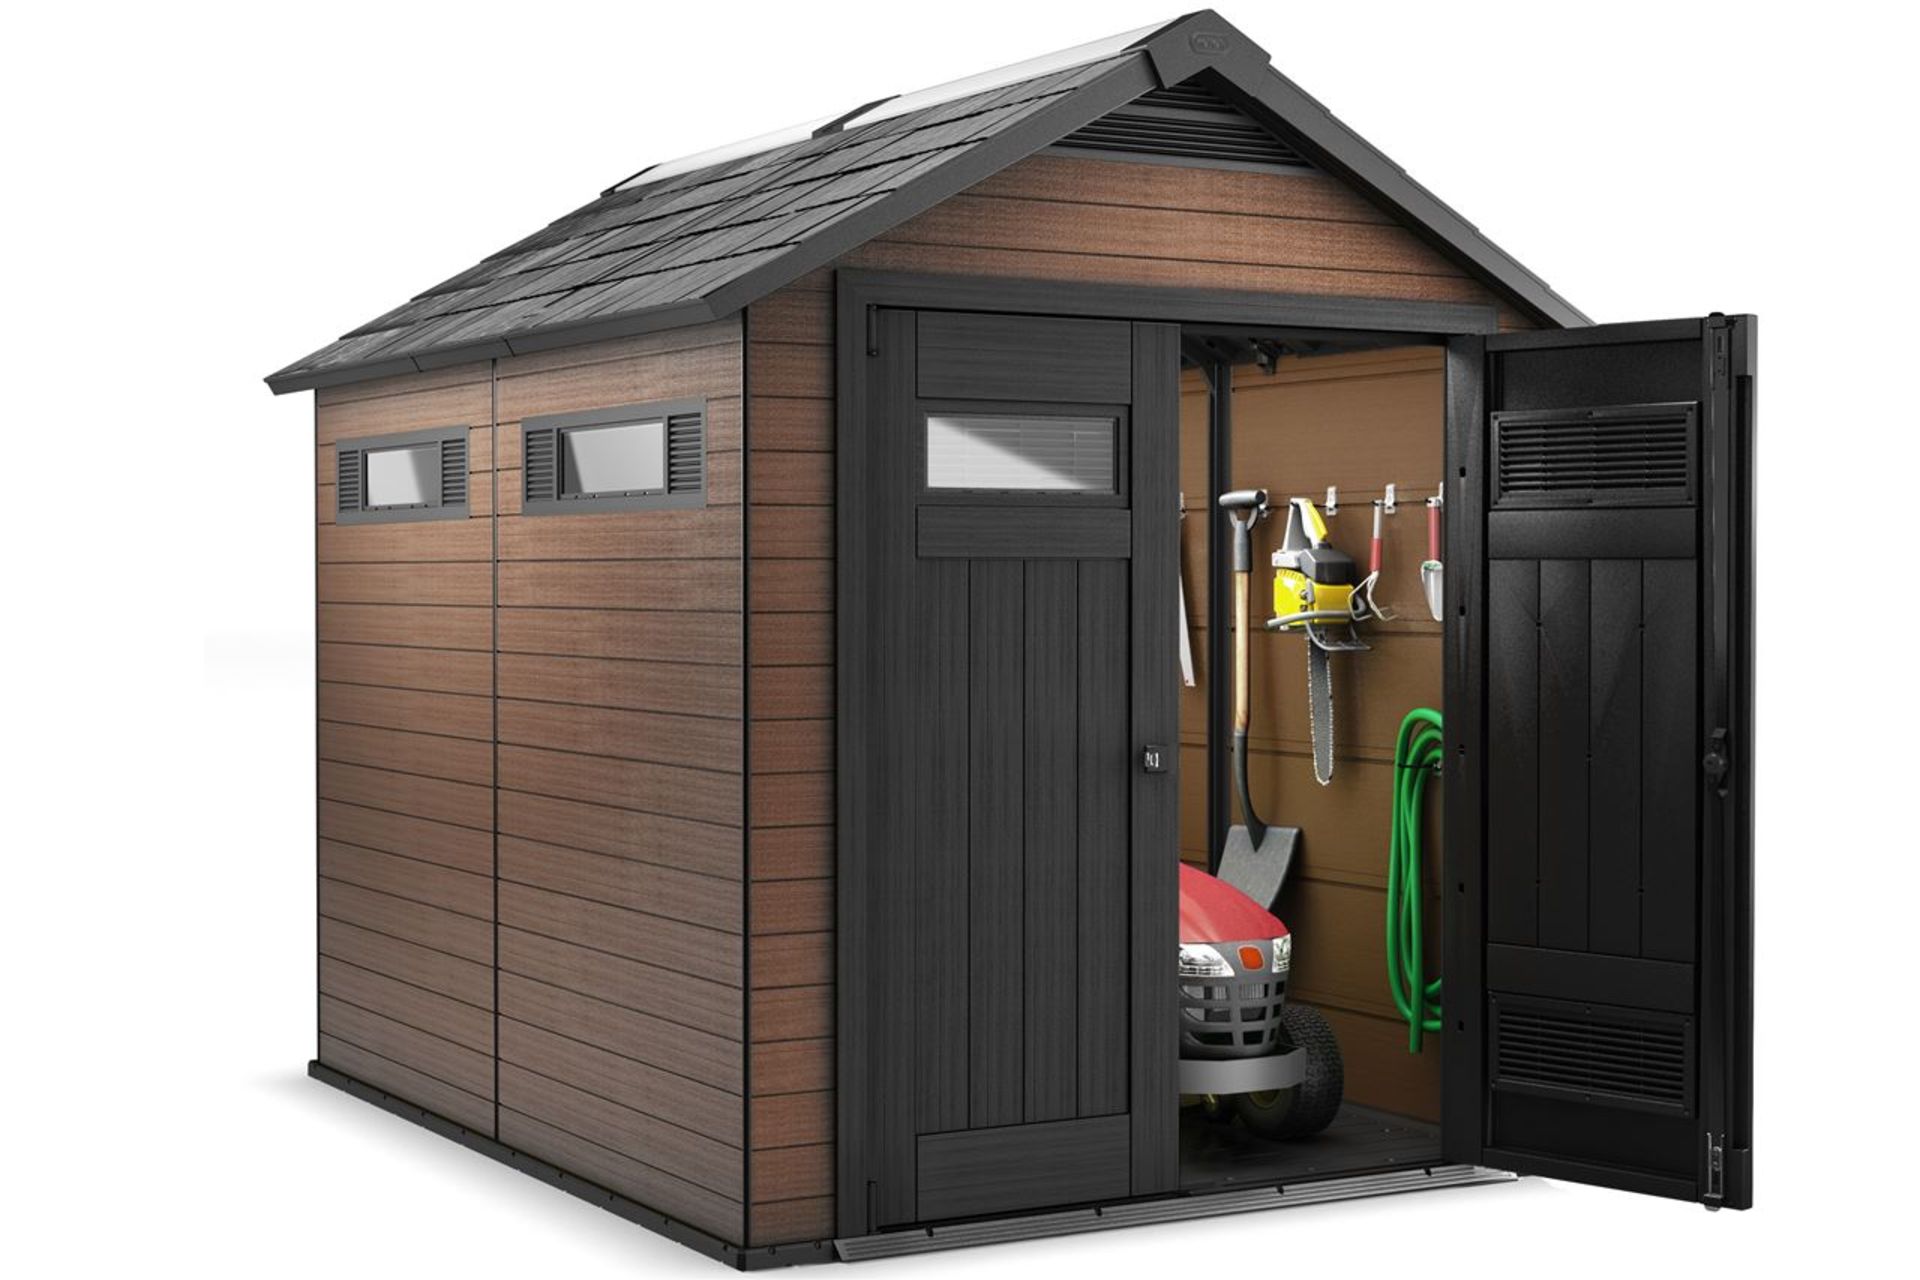 Keter Oakland 759 Outdoor Shed RRP £1100 - Image 3 of 5